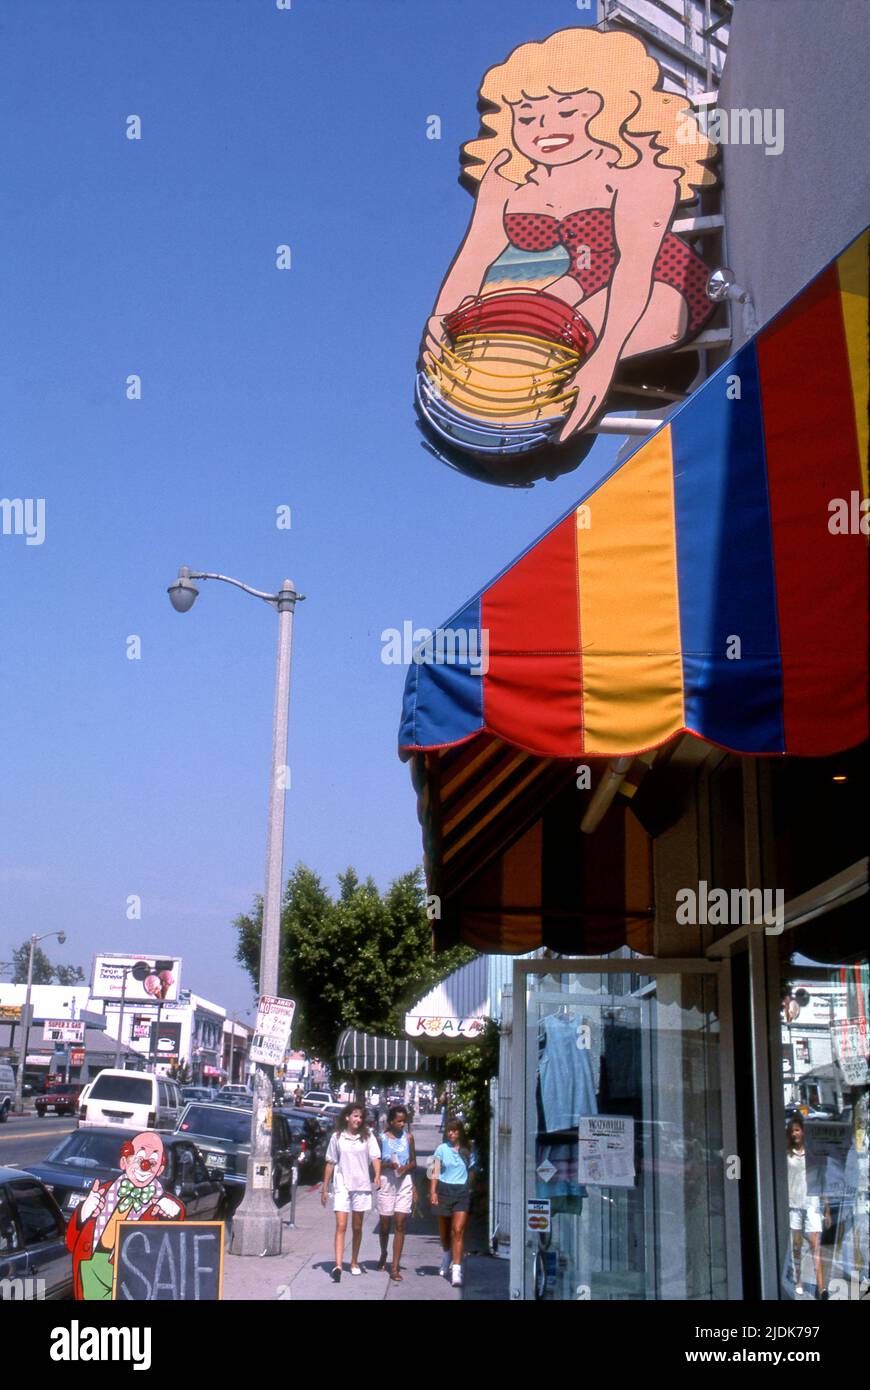 Young girls walking on Melrose Ave. in Los Angeles, circa 1980s Stock Photo